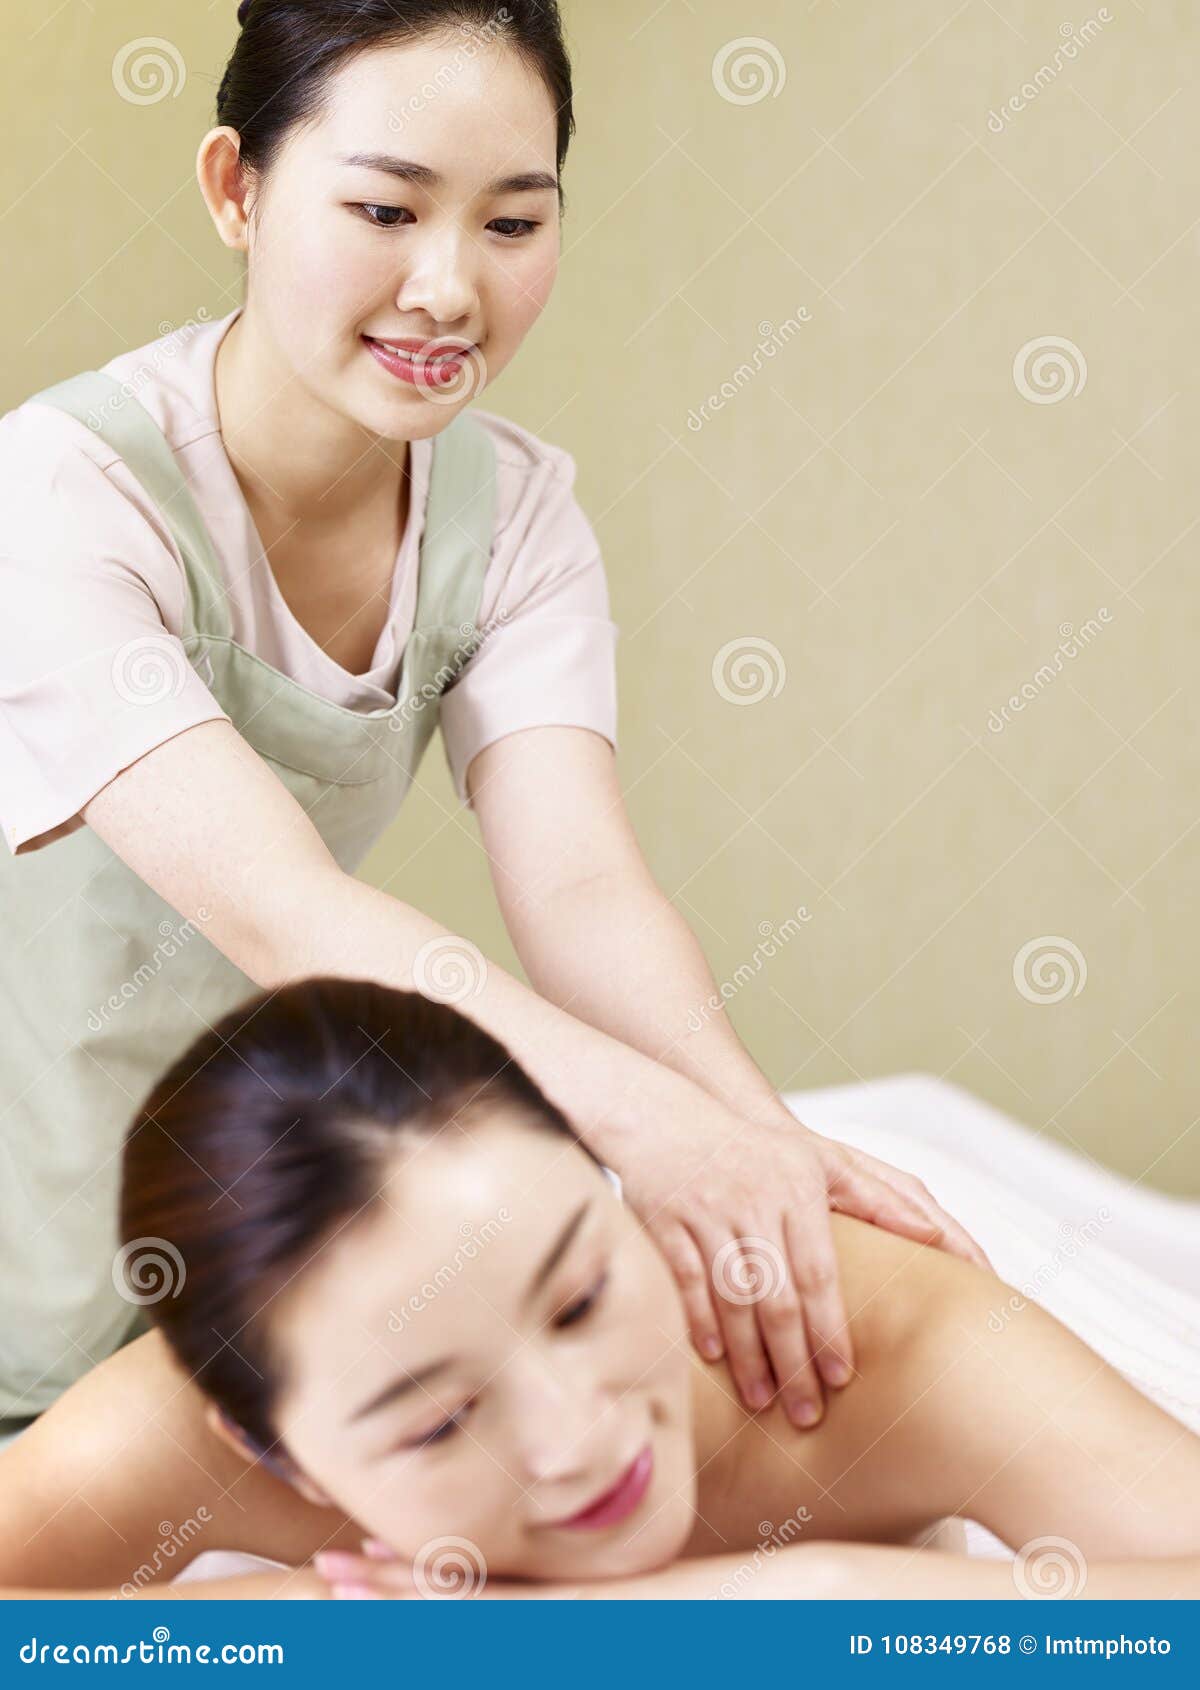 conner walsh recommends asian massage pic pic